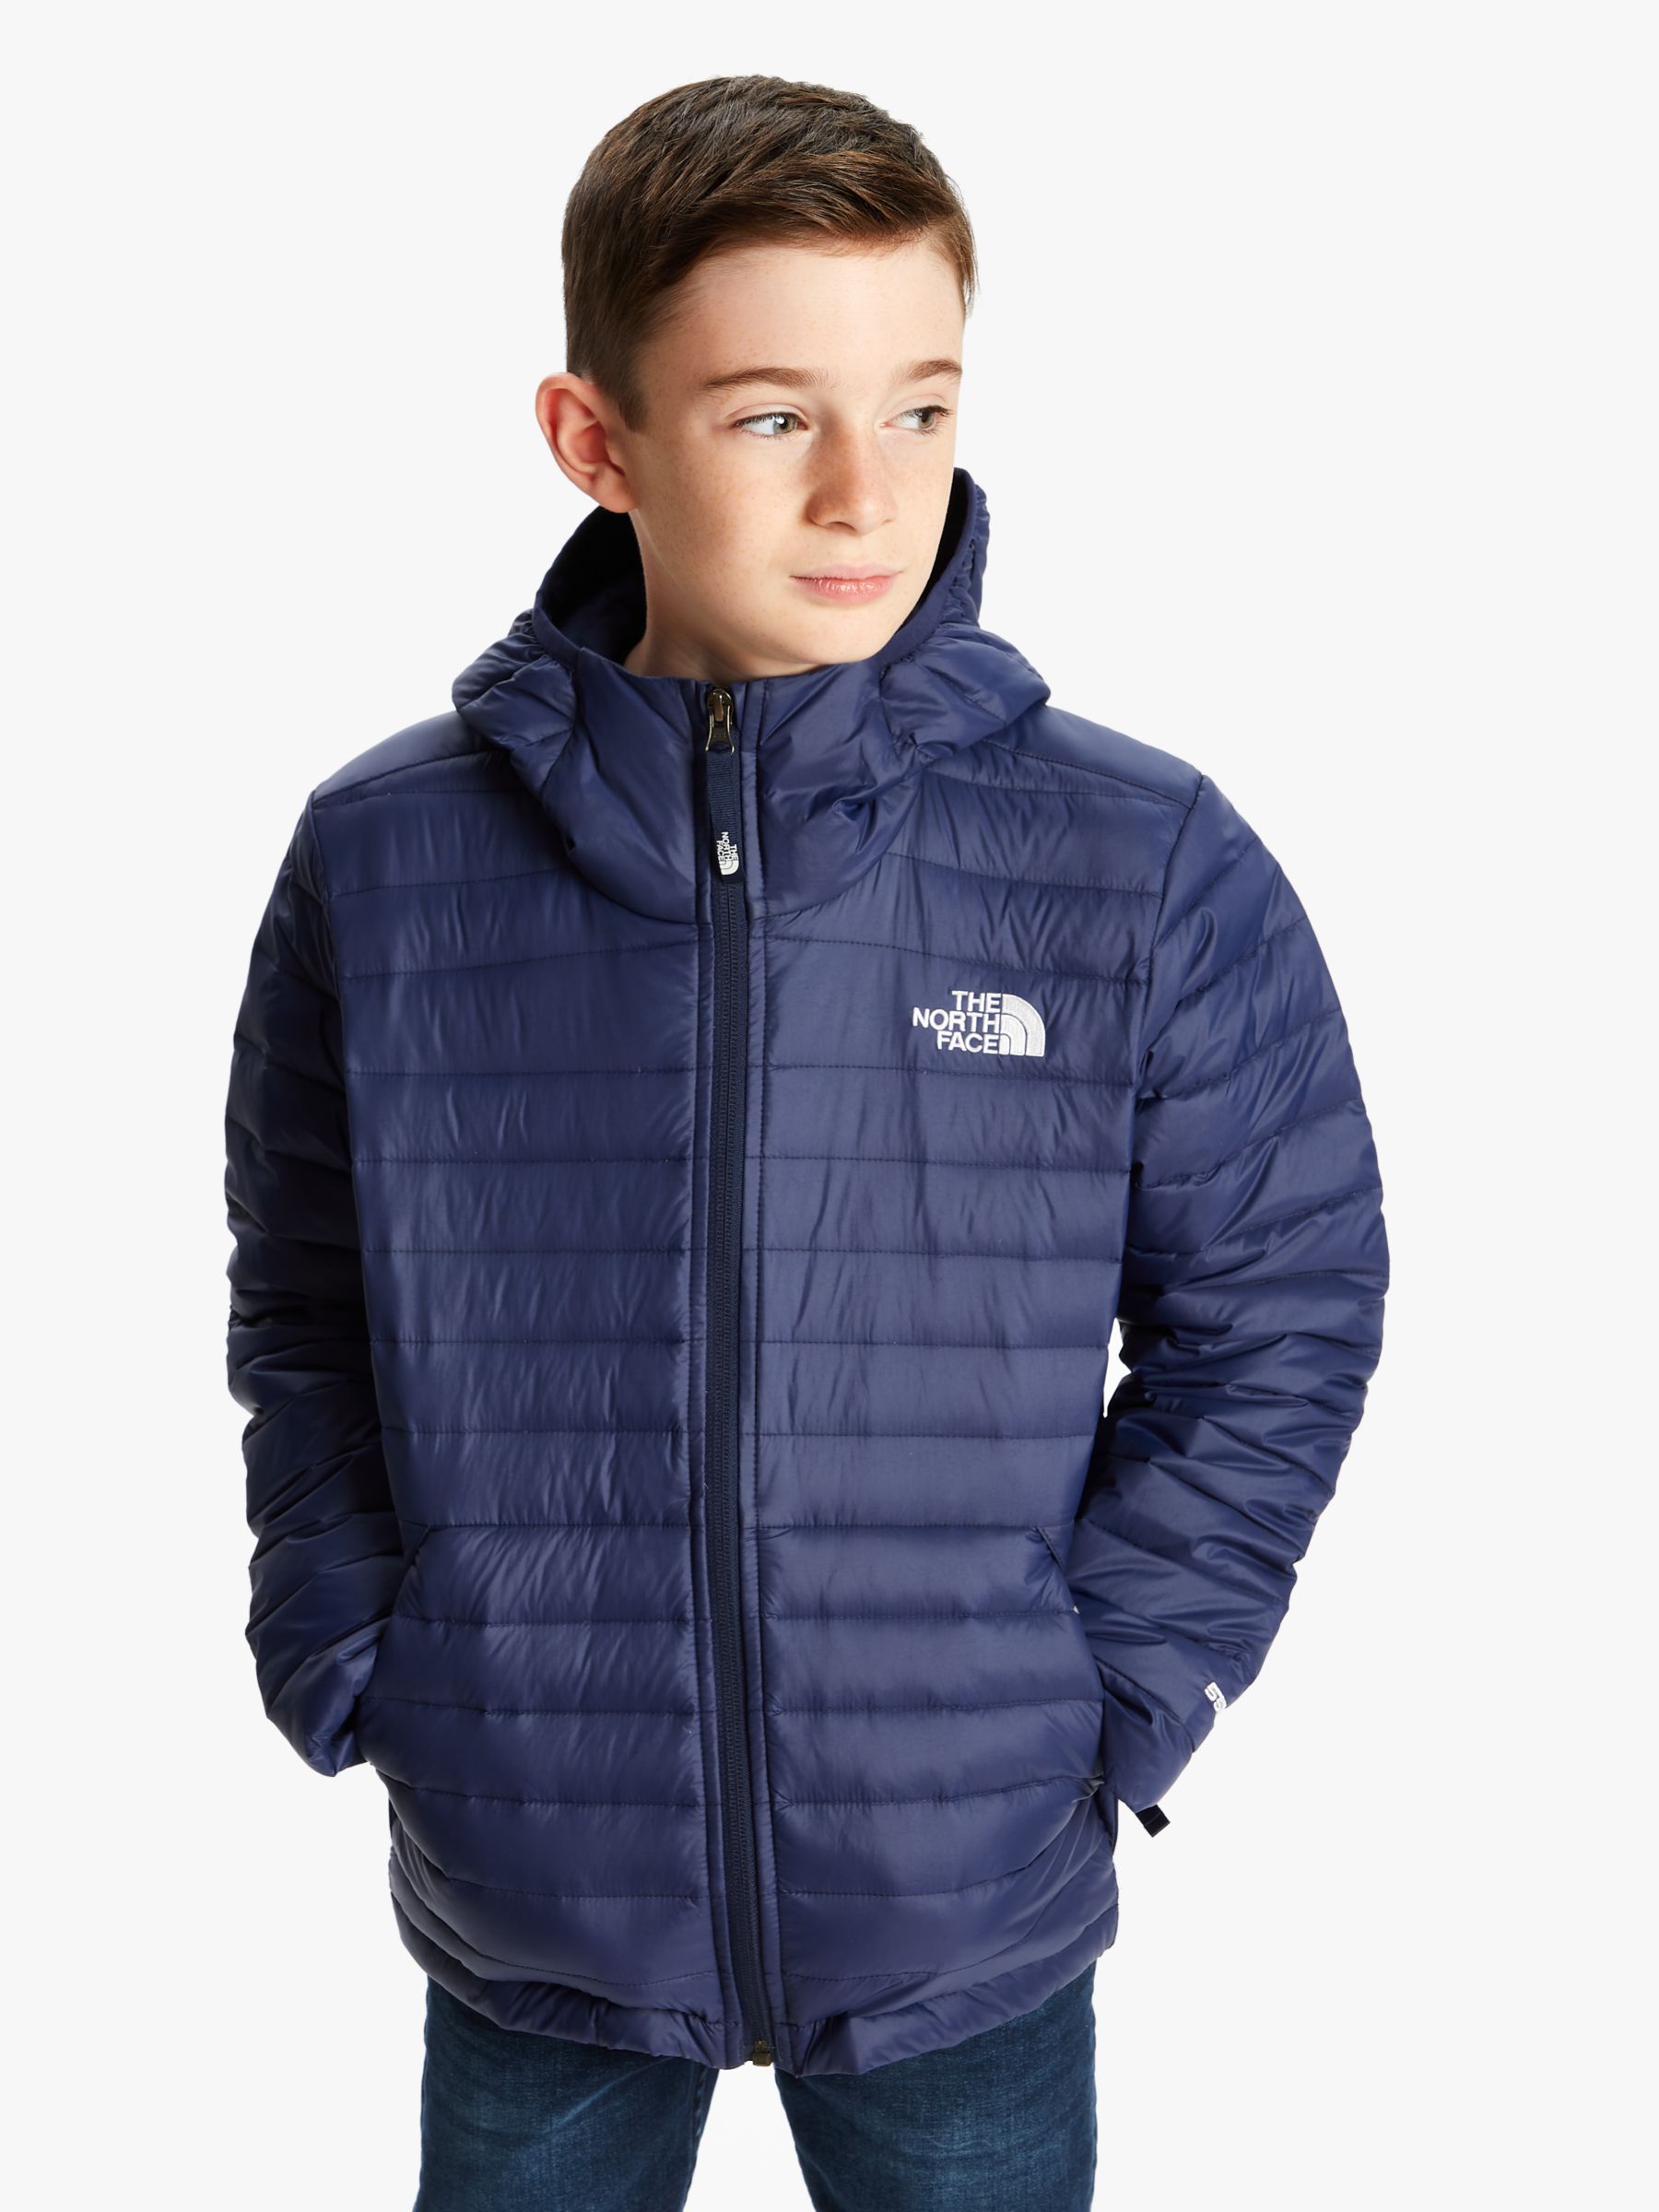 the north face childrens jacket